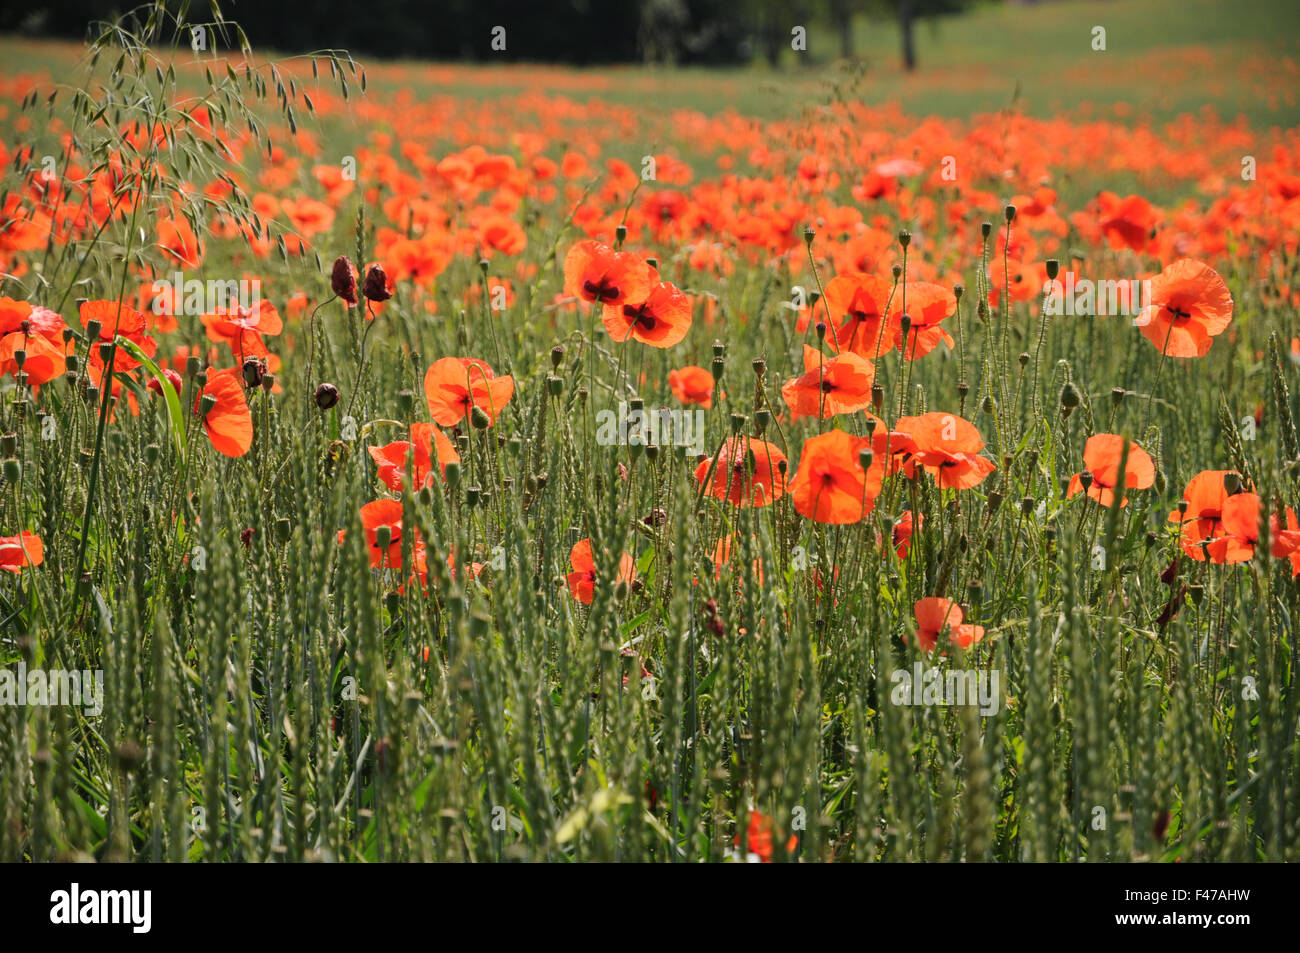 Dinkel wheat with poppies Stock Photo